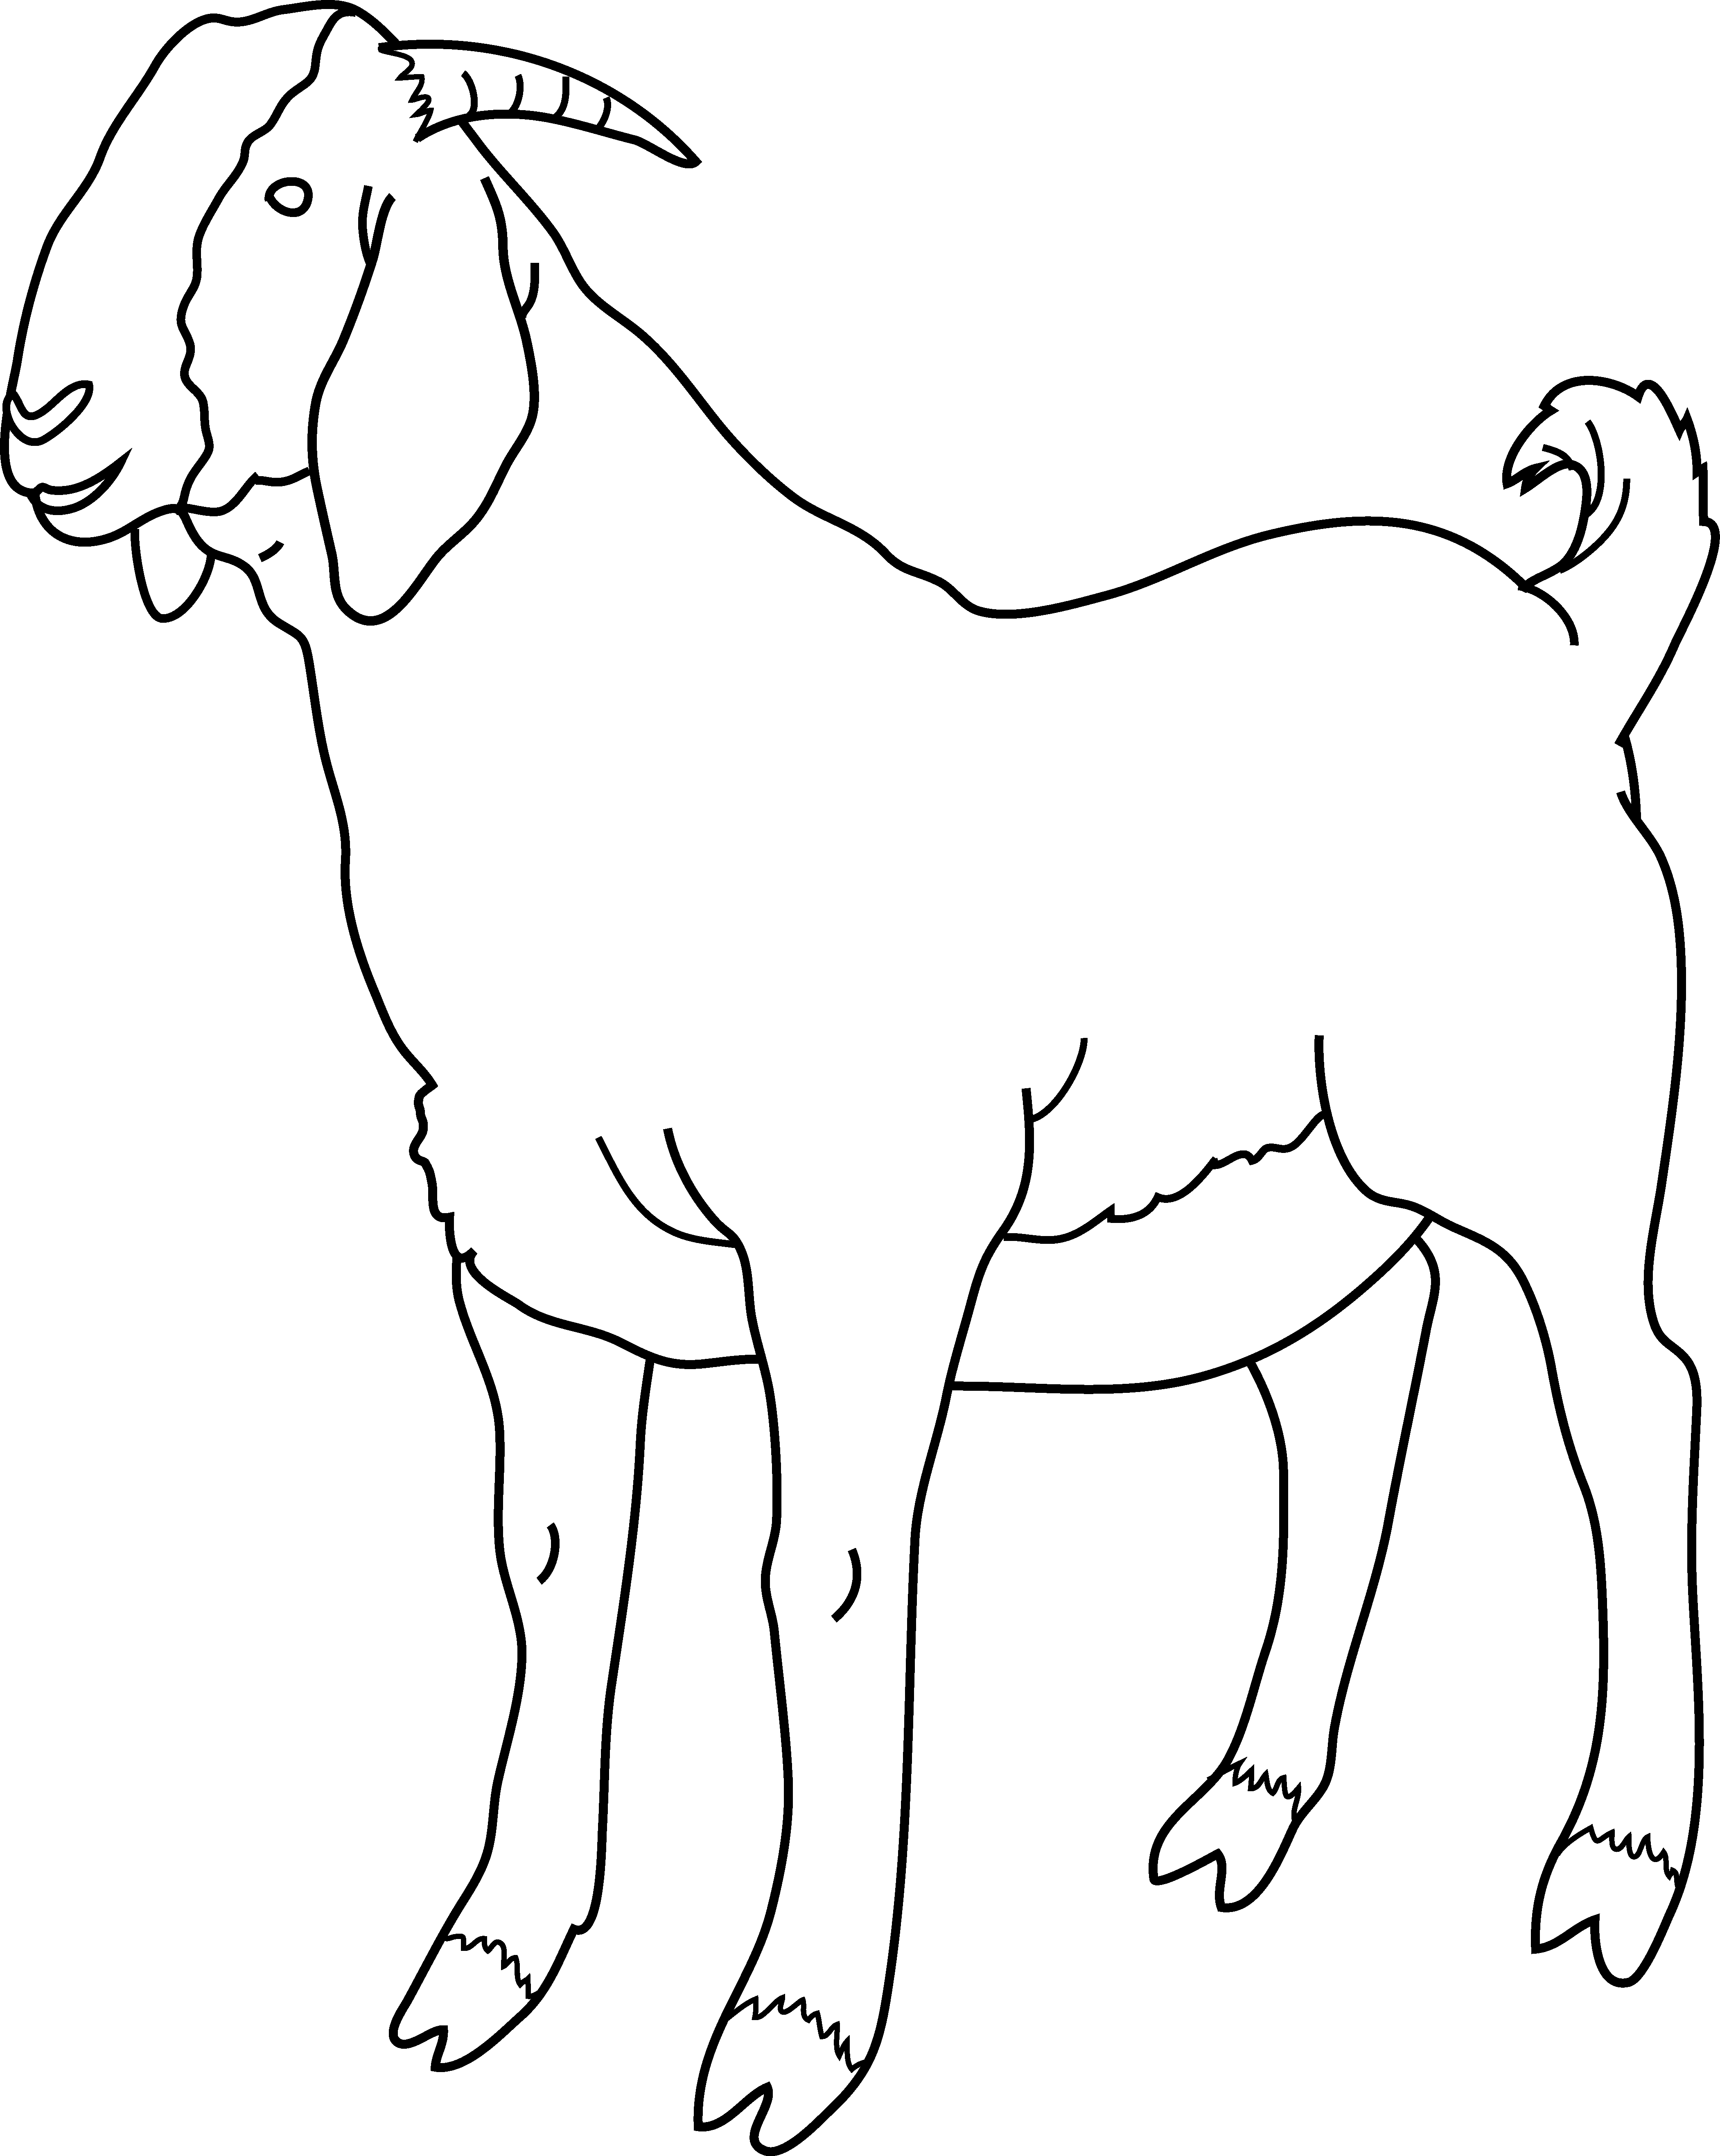 Goat Coloring Page - Free Clip Art